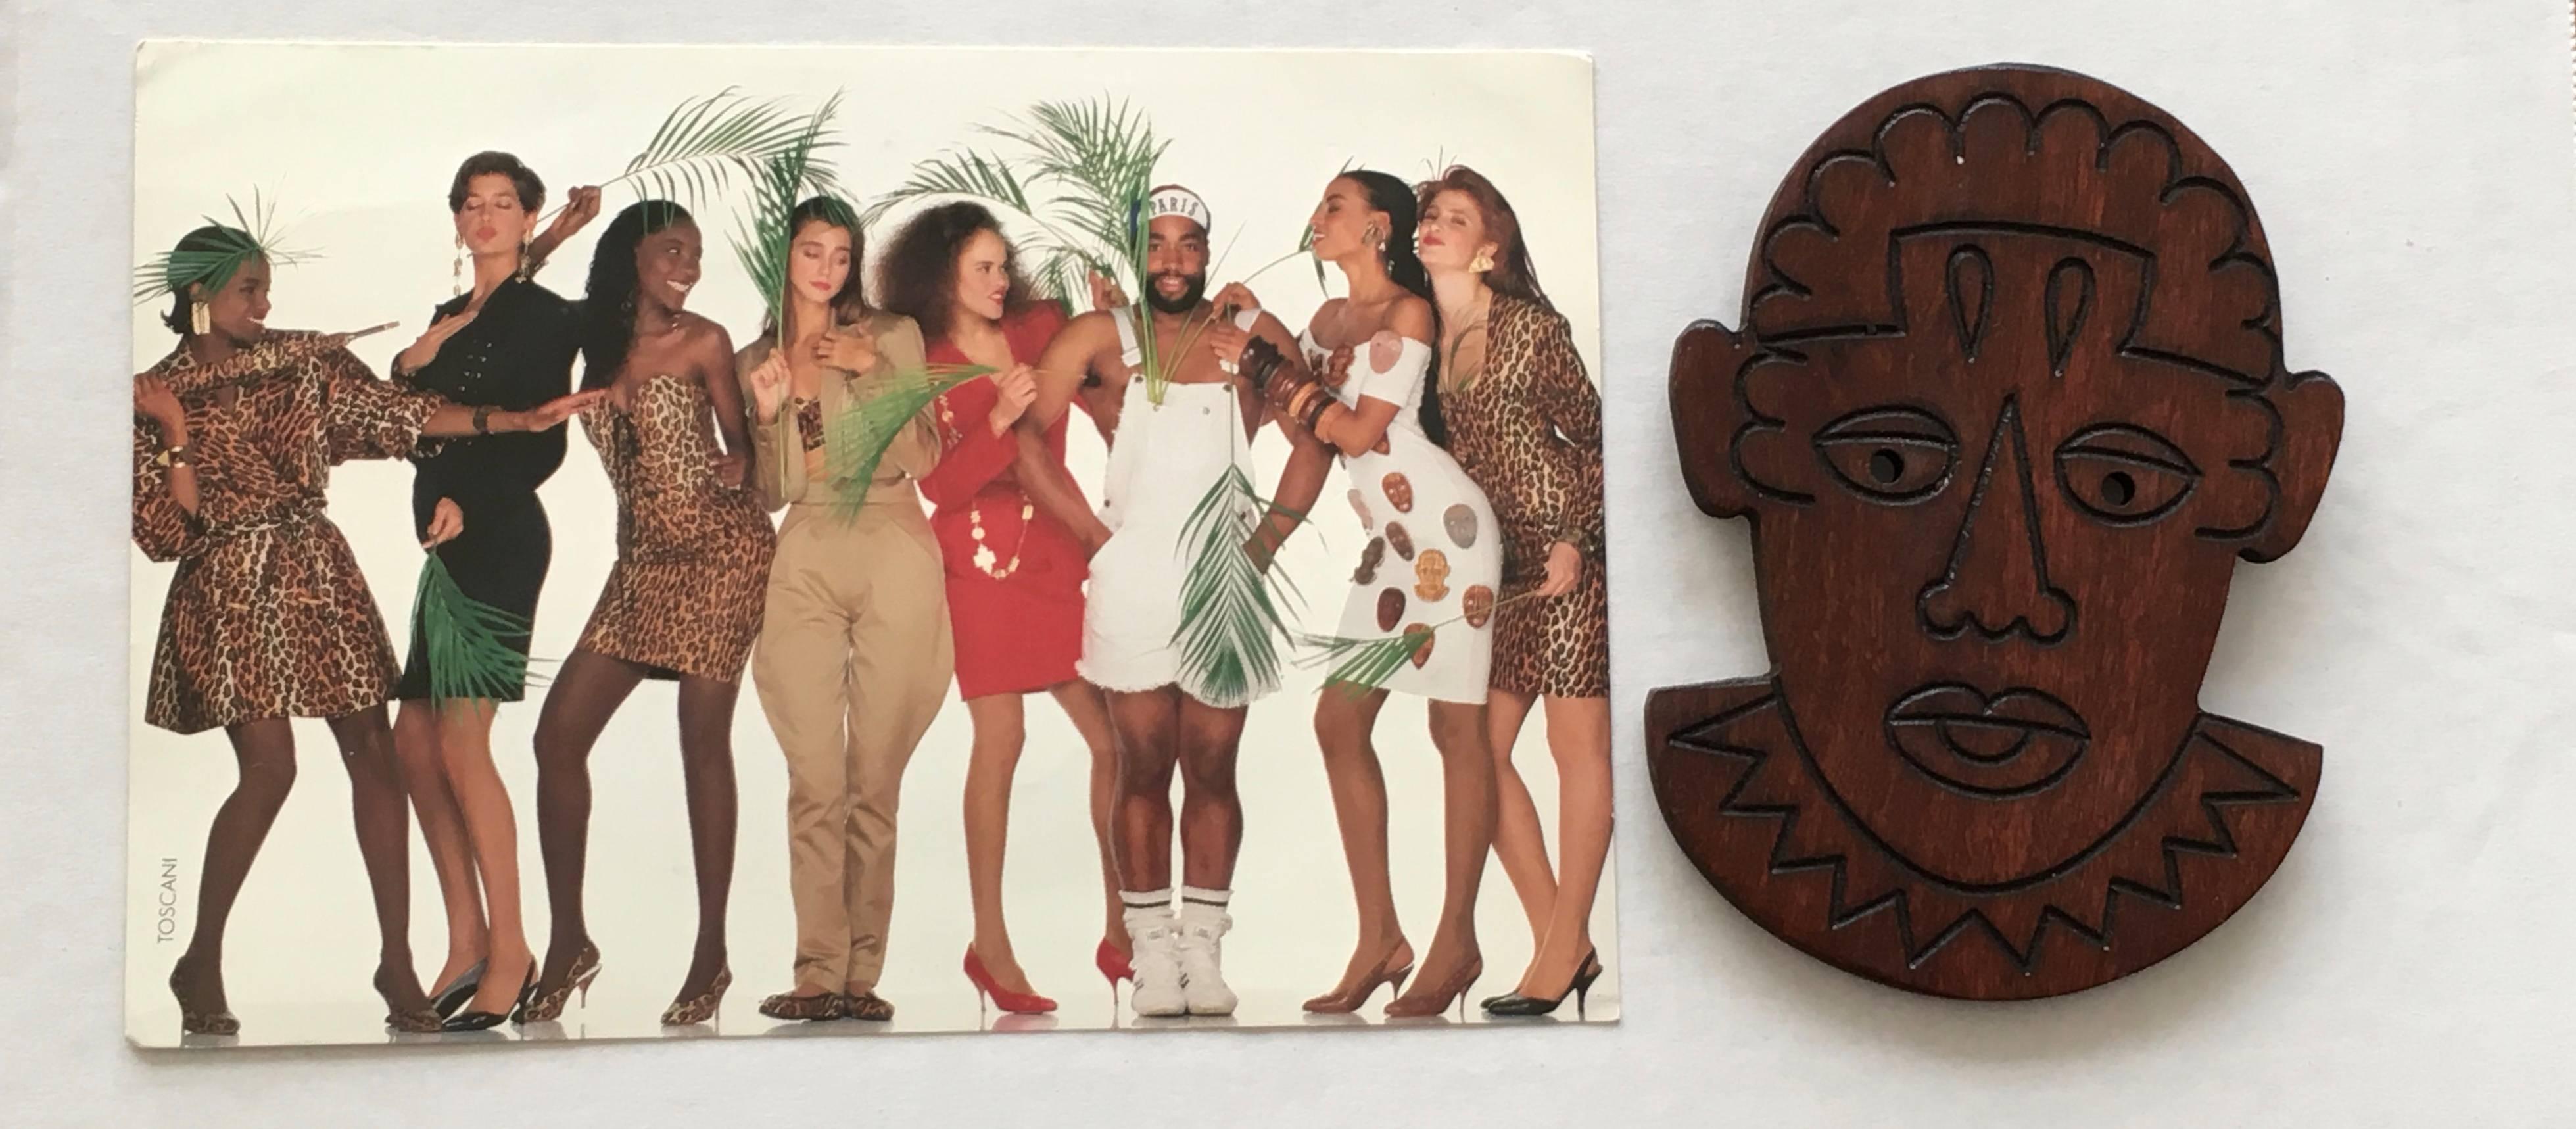 Patrick Kelly Paris 1989 African wooden face cutout pin / brooch. 
This is from the private collection of one of Patrick Kelly's lifelong friend & model, Carol Martin, from Atlanta, GA. Carol Martin modeled in the Patrick Kelly 1989 Spring